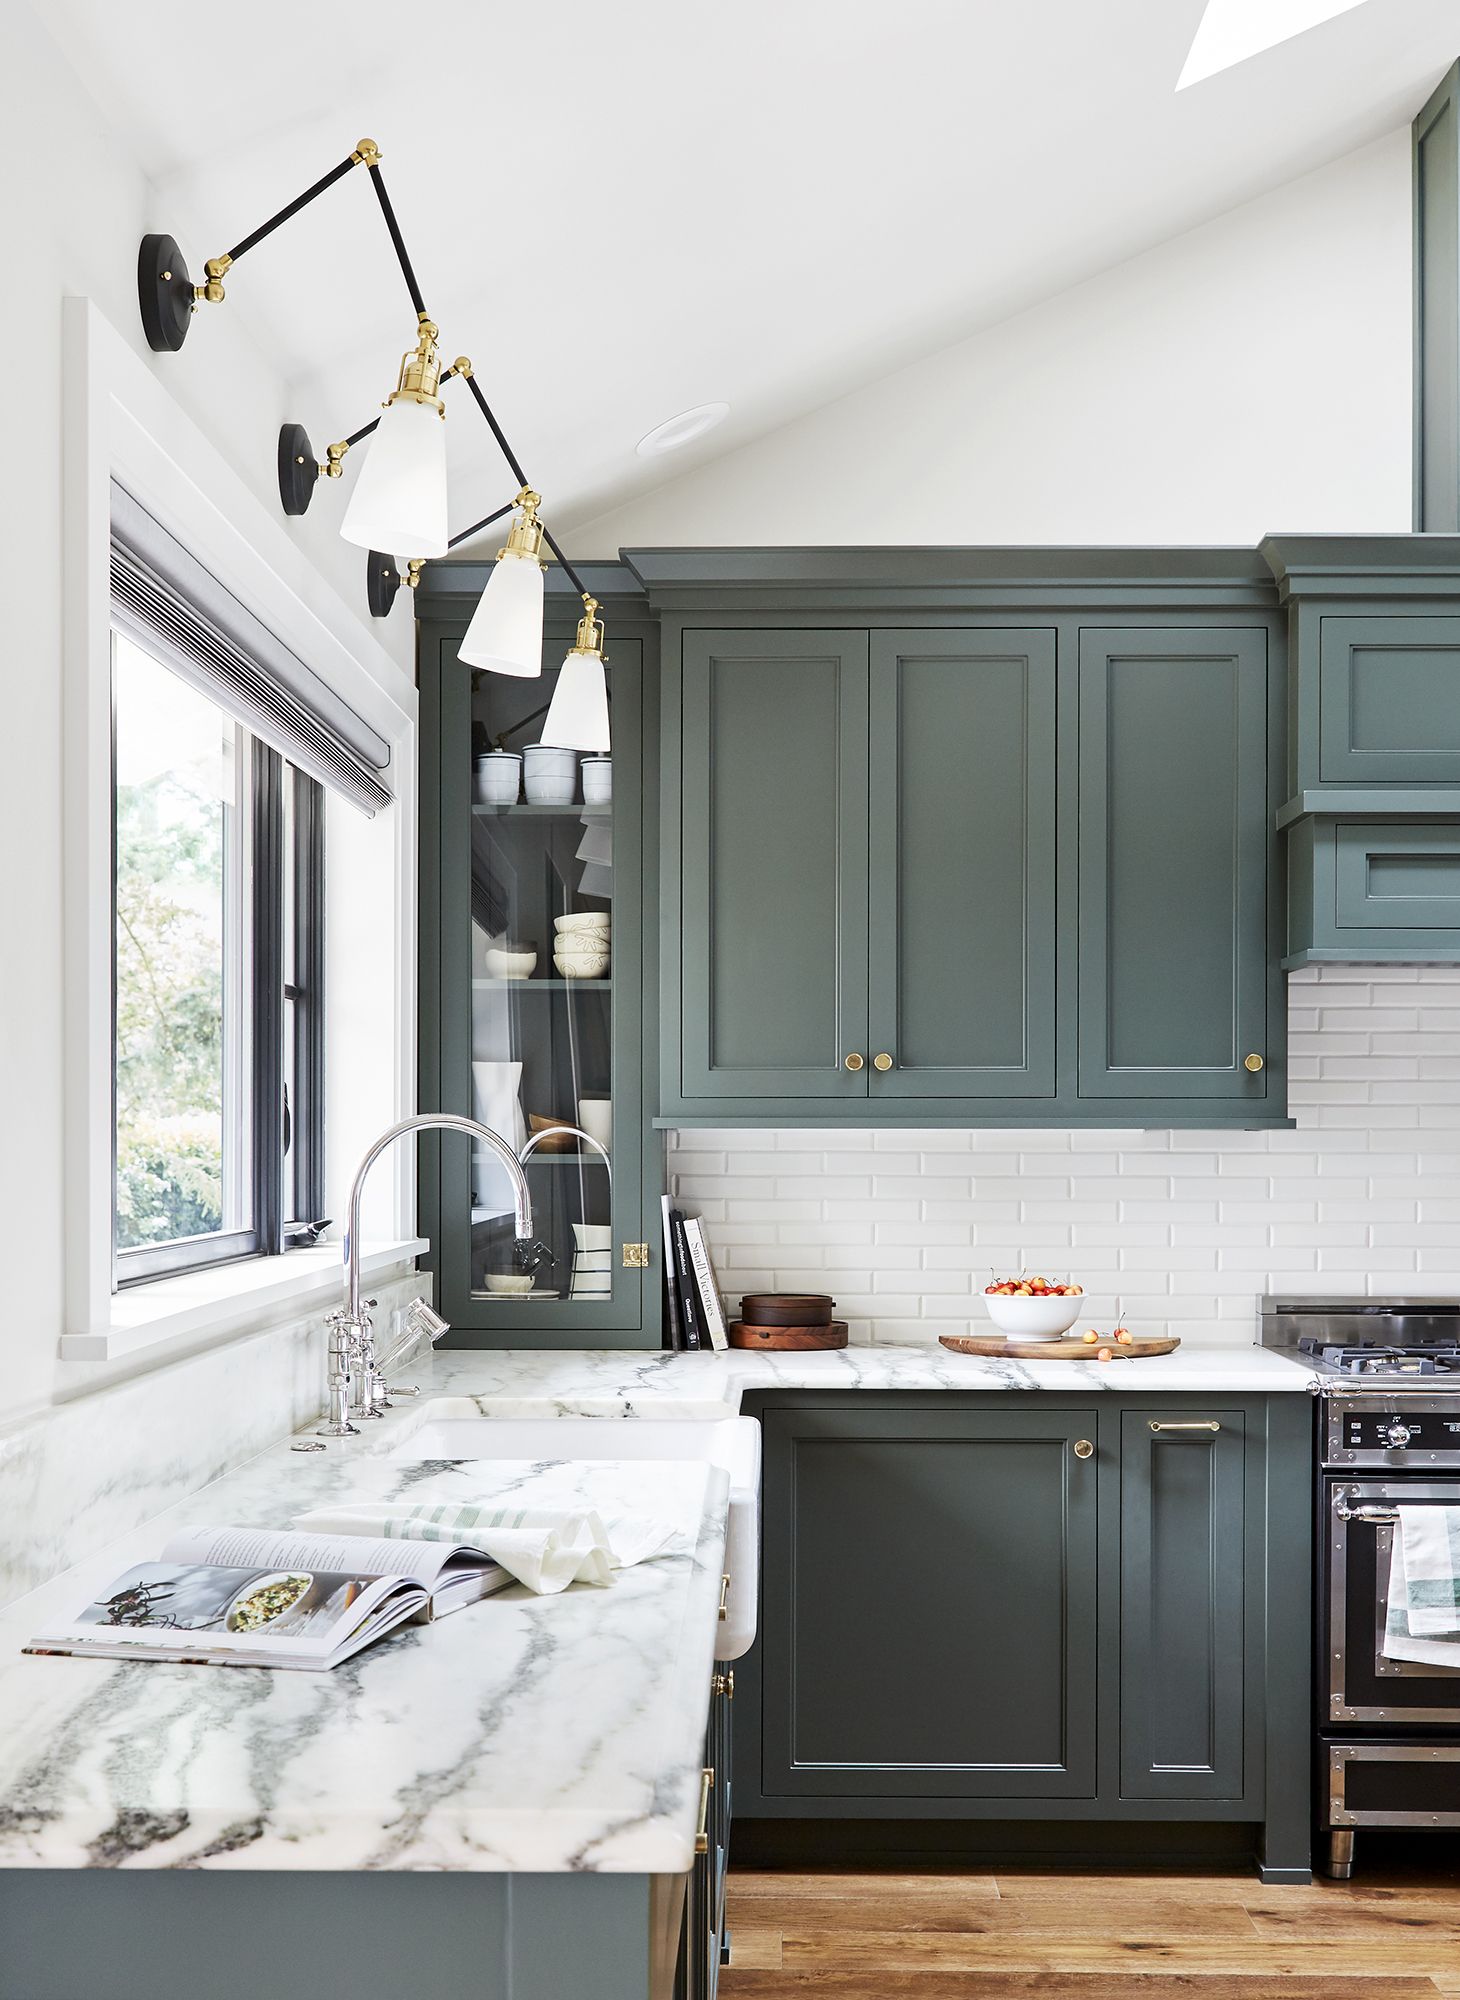 How To Paint Your Kitchen Cabinets, What Paint Is Used On Kitchen Cabinets